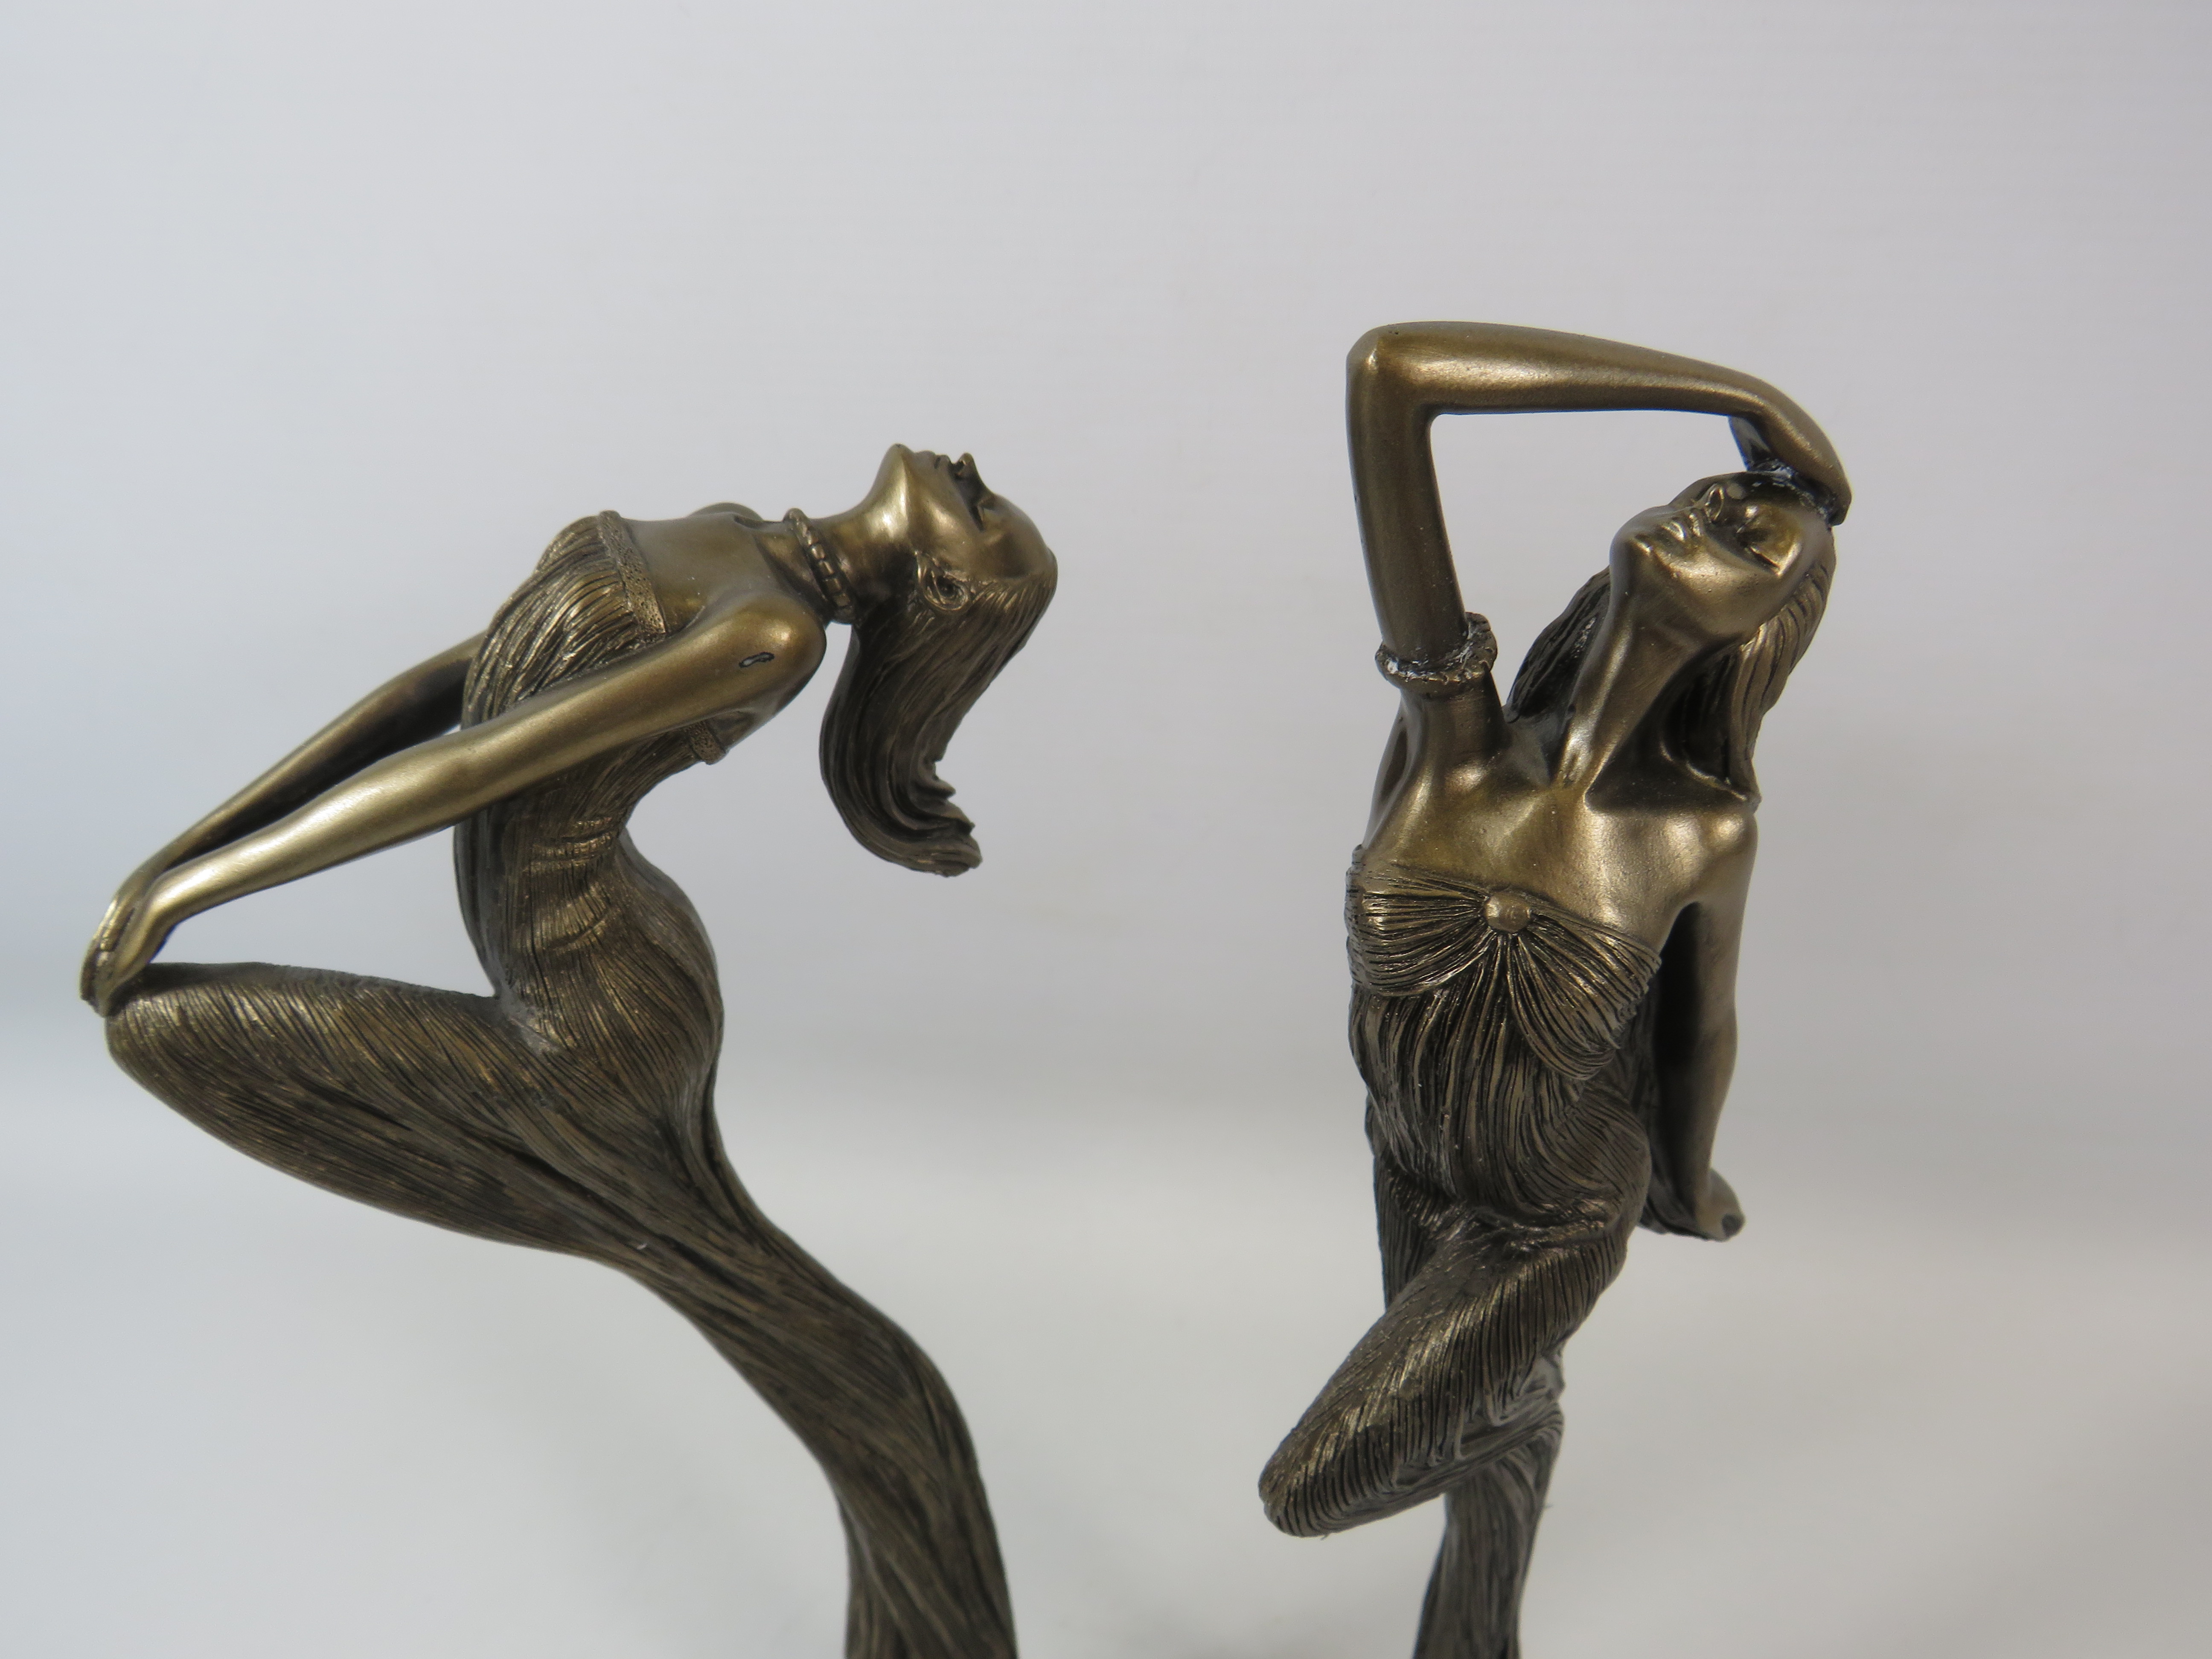 Pair of Art nouveau style figurines, approx 36cm tall. With boxes. - Image 2 of 2